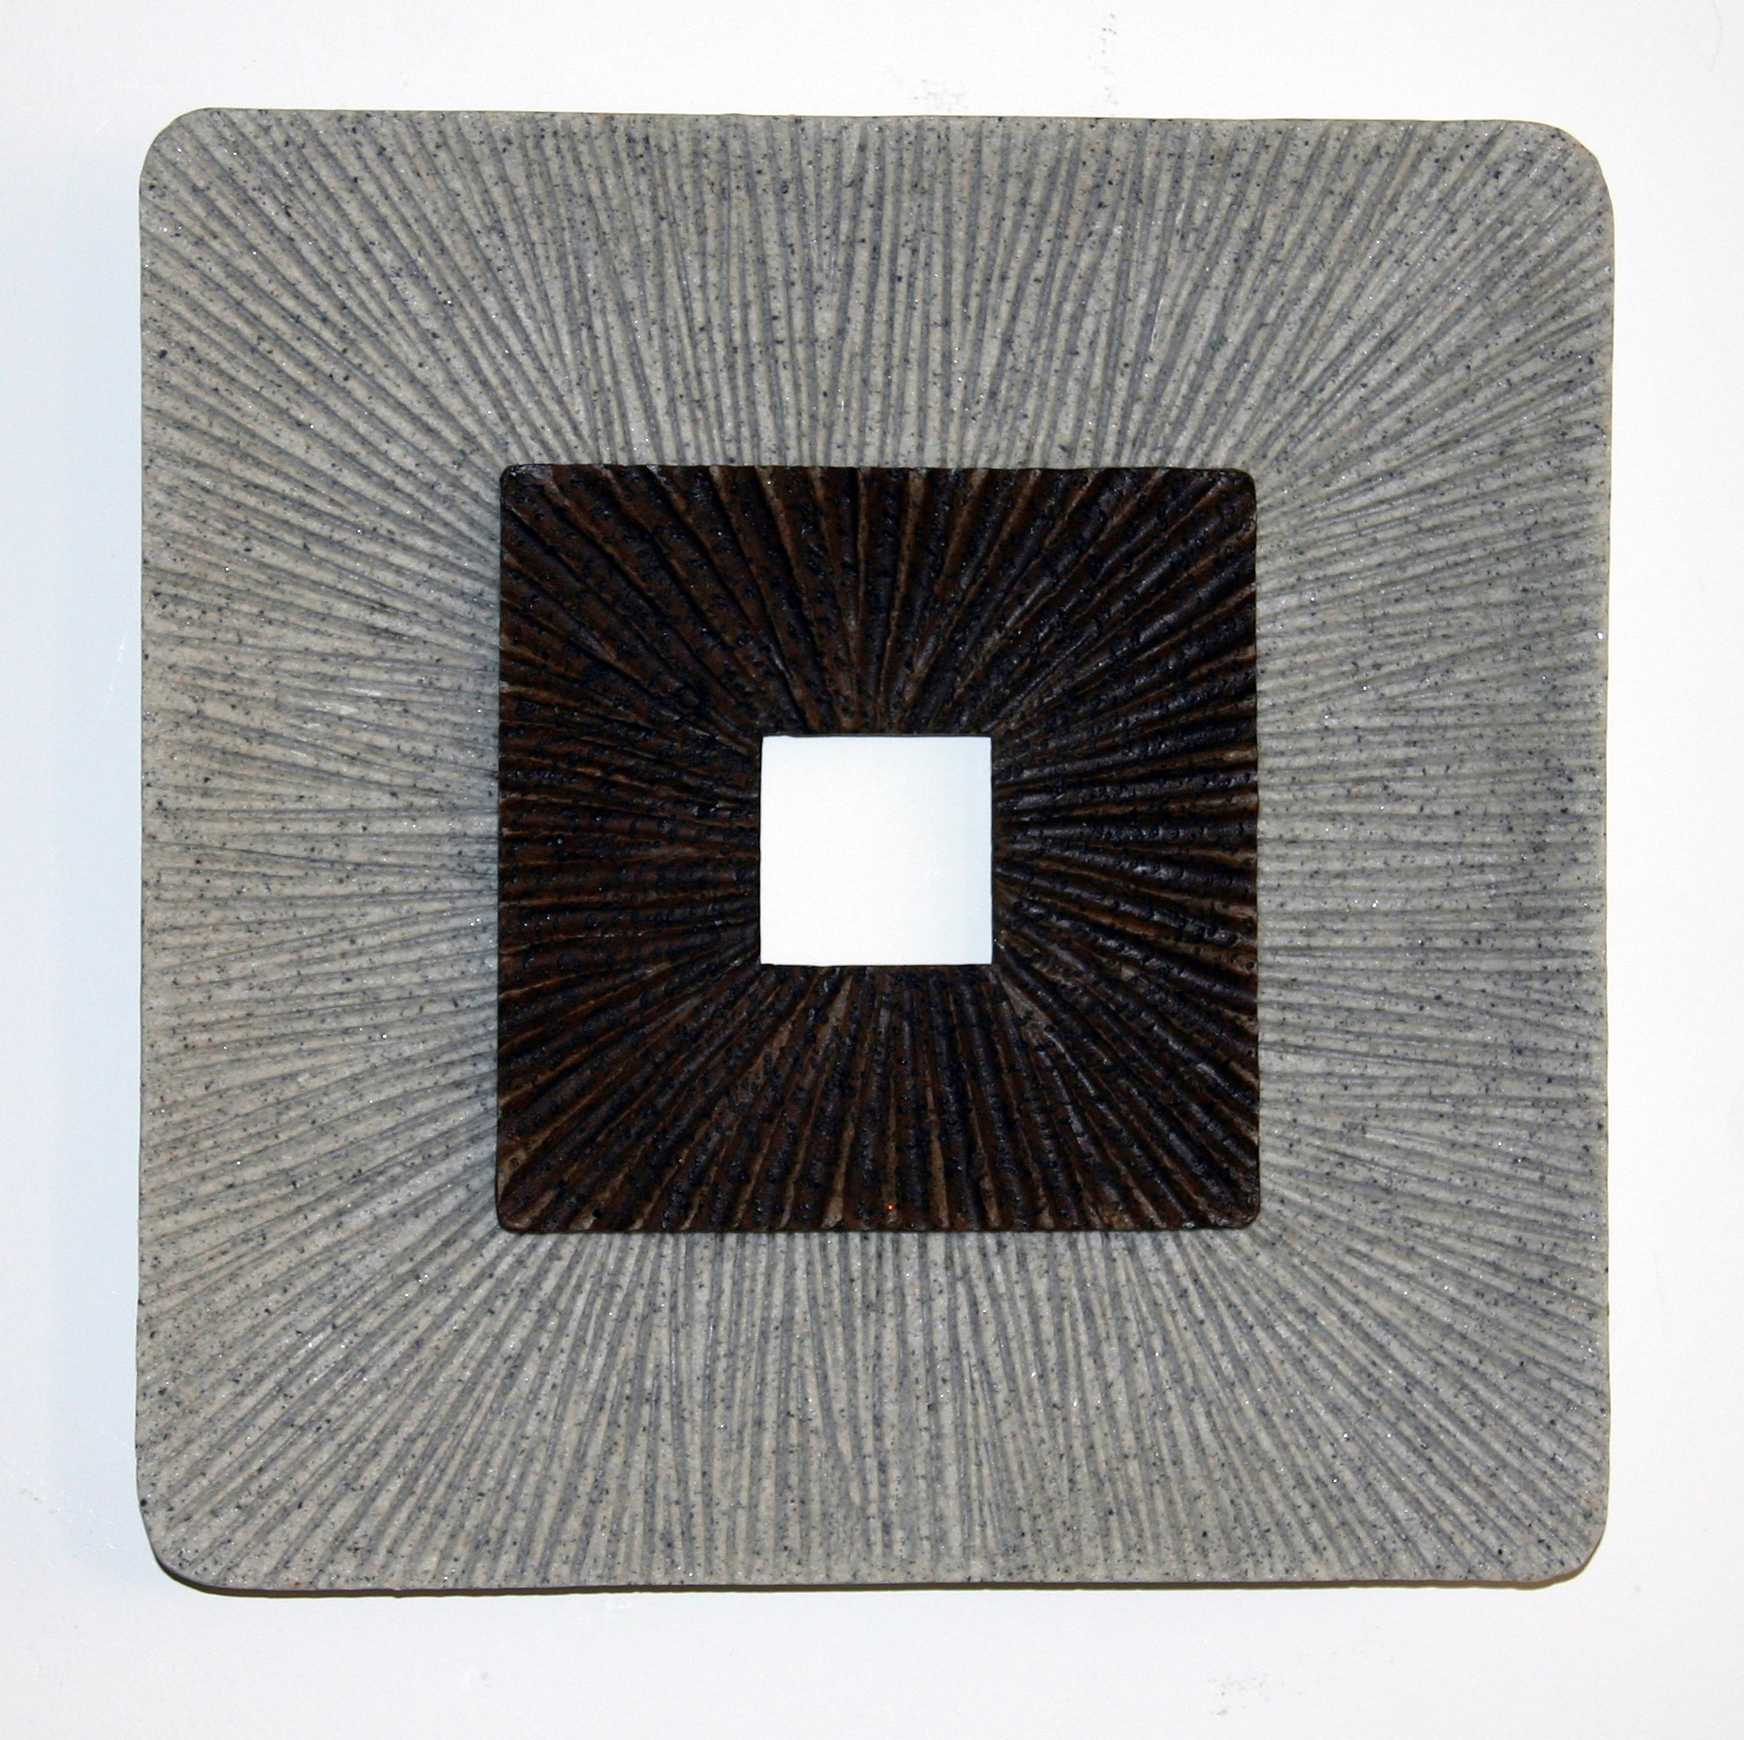 19" X 19" X 2.5" Modern Brown And Gray Ribbed Square Wall Art